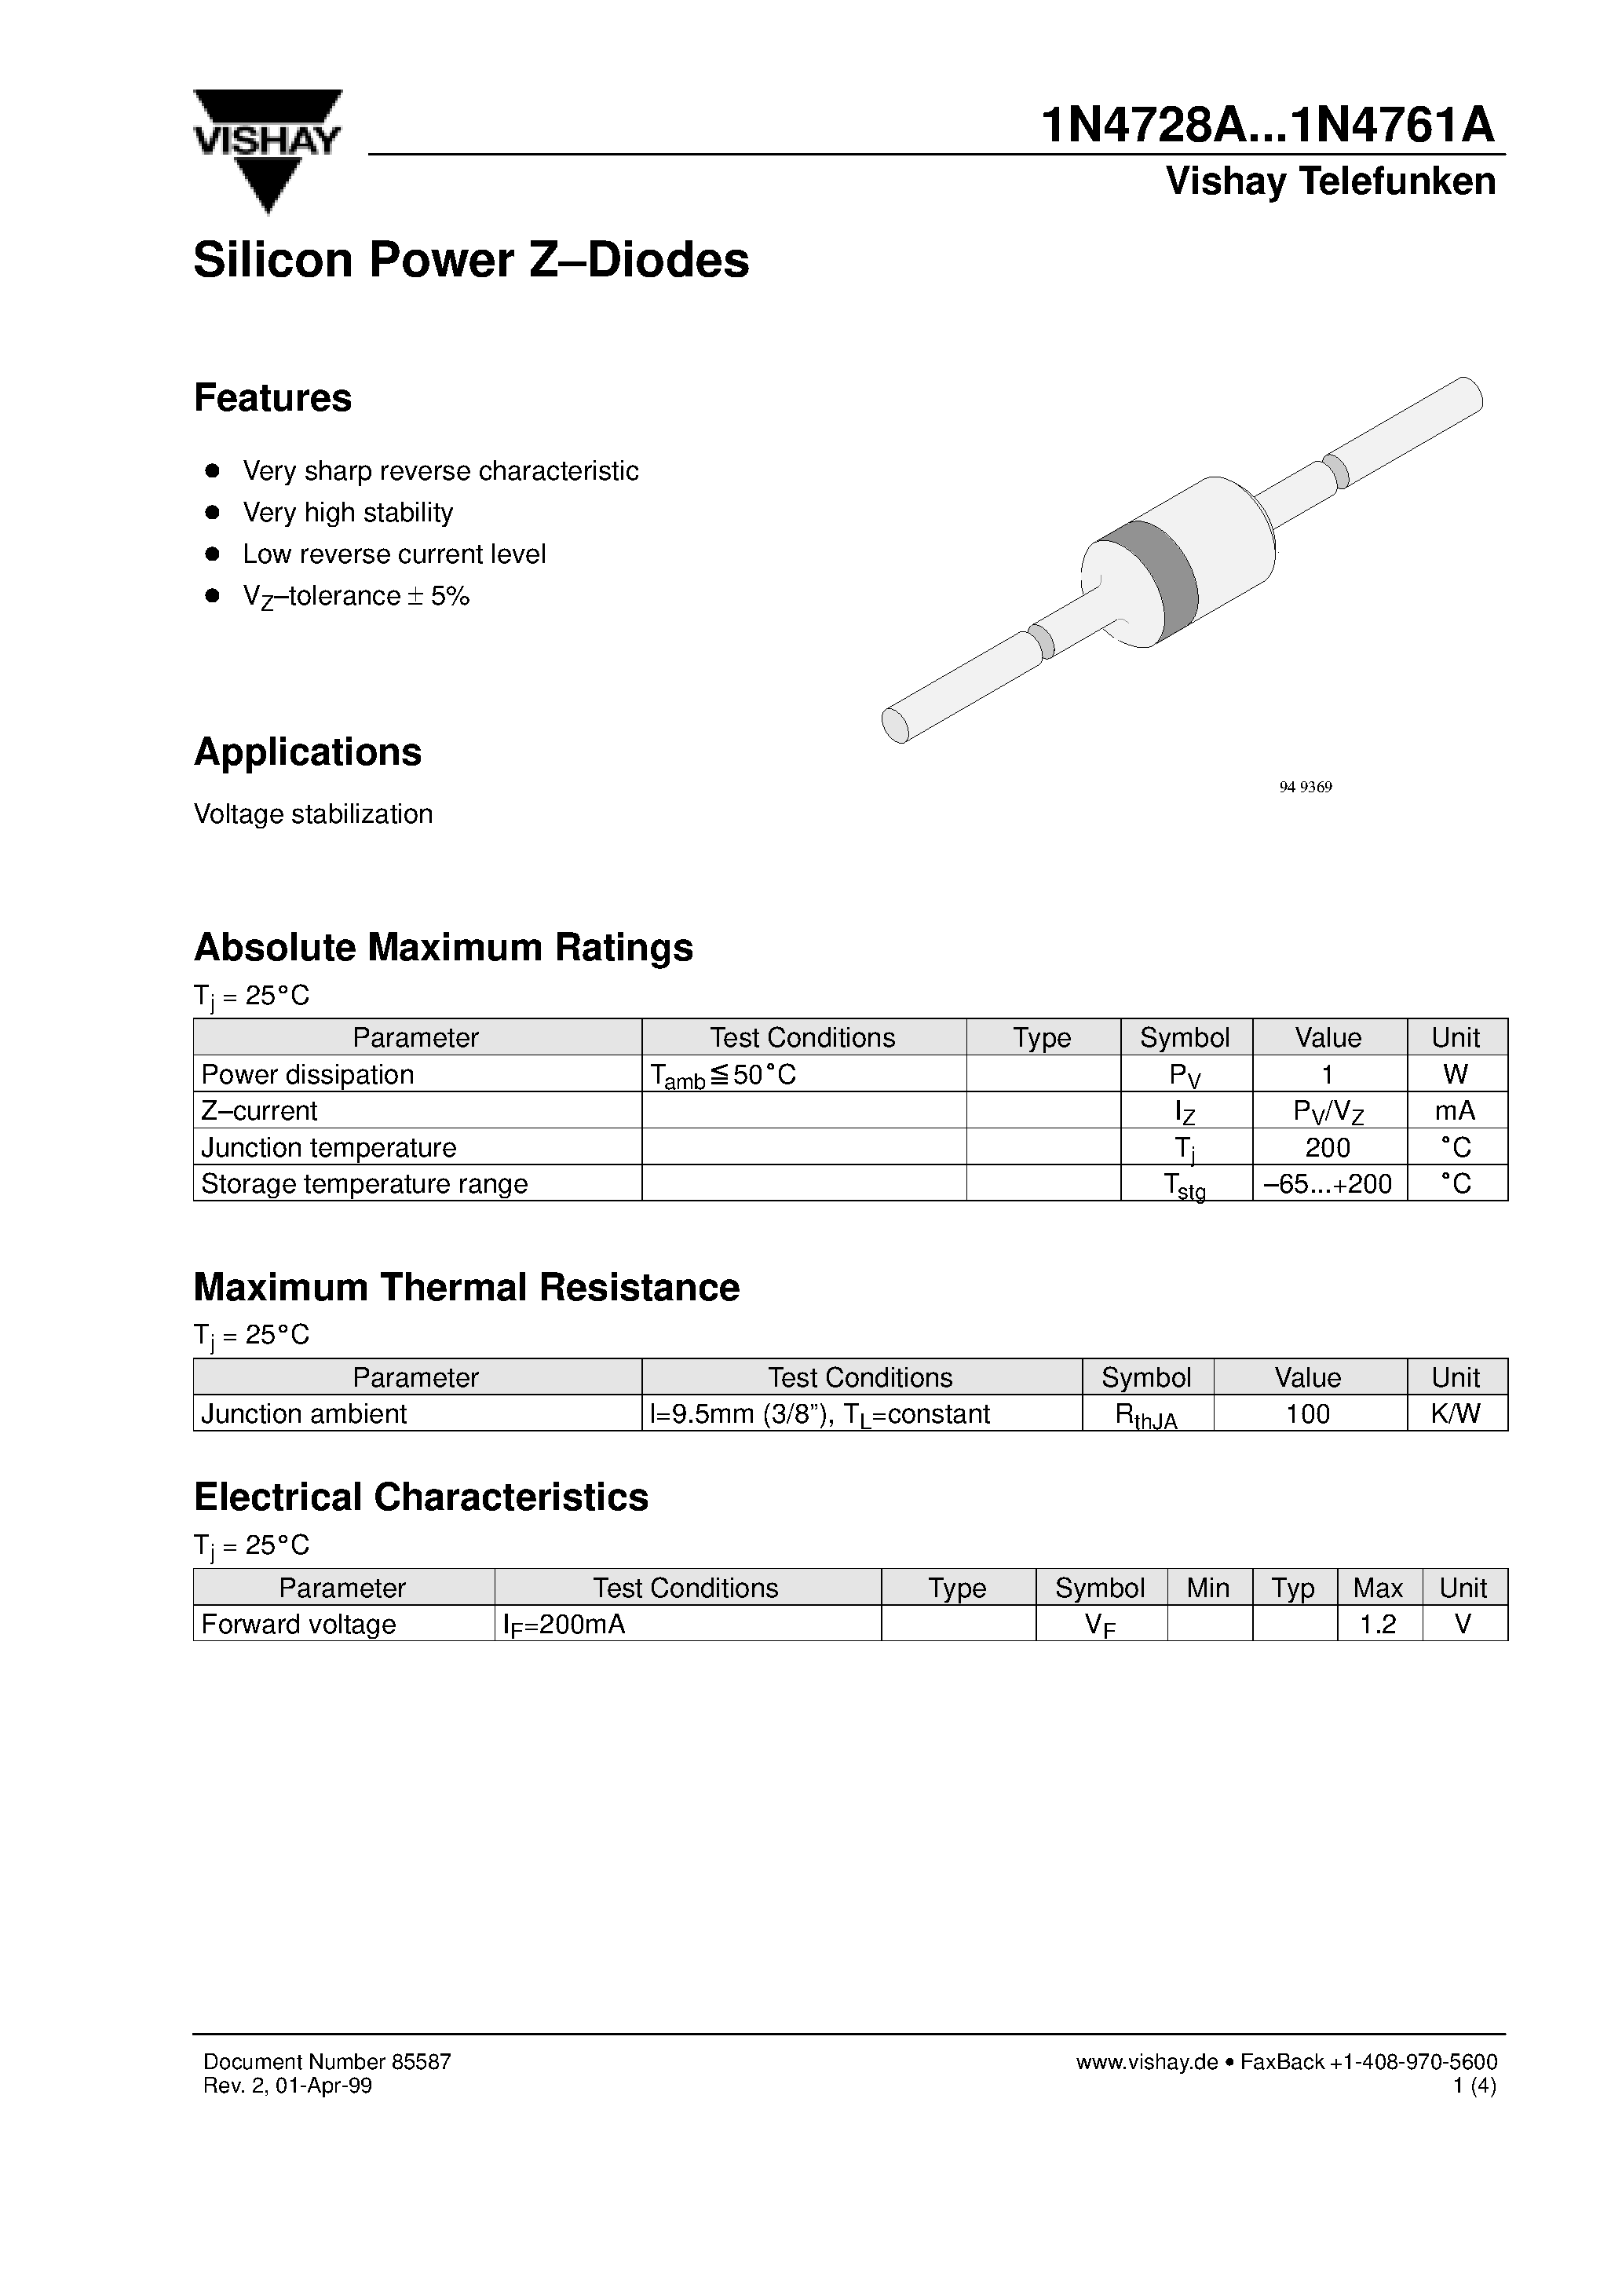 Datasheet 1N4743A - Silicon Power Z-Diodes page 1